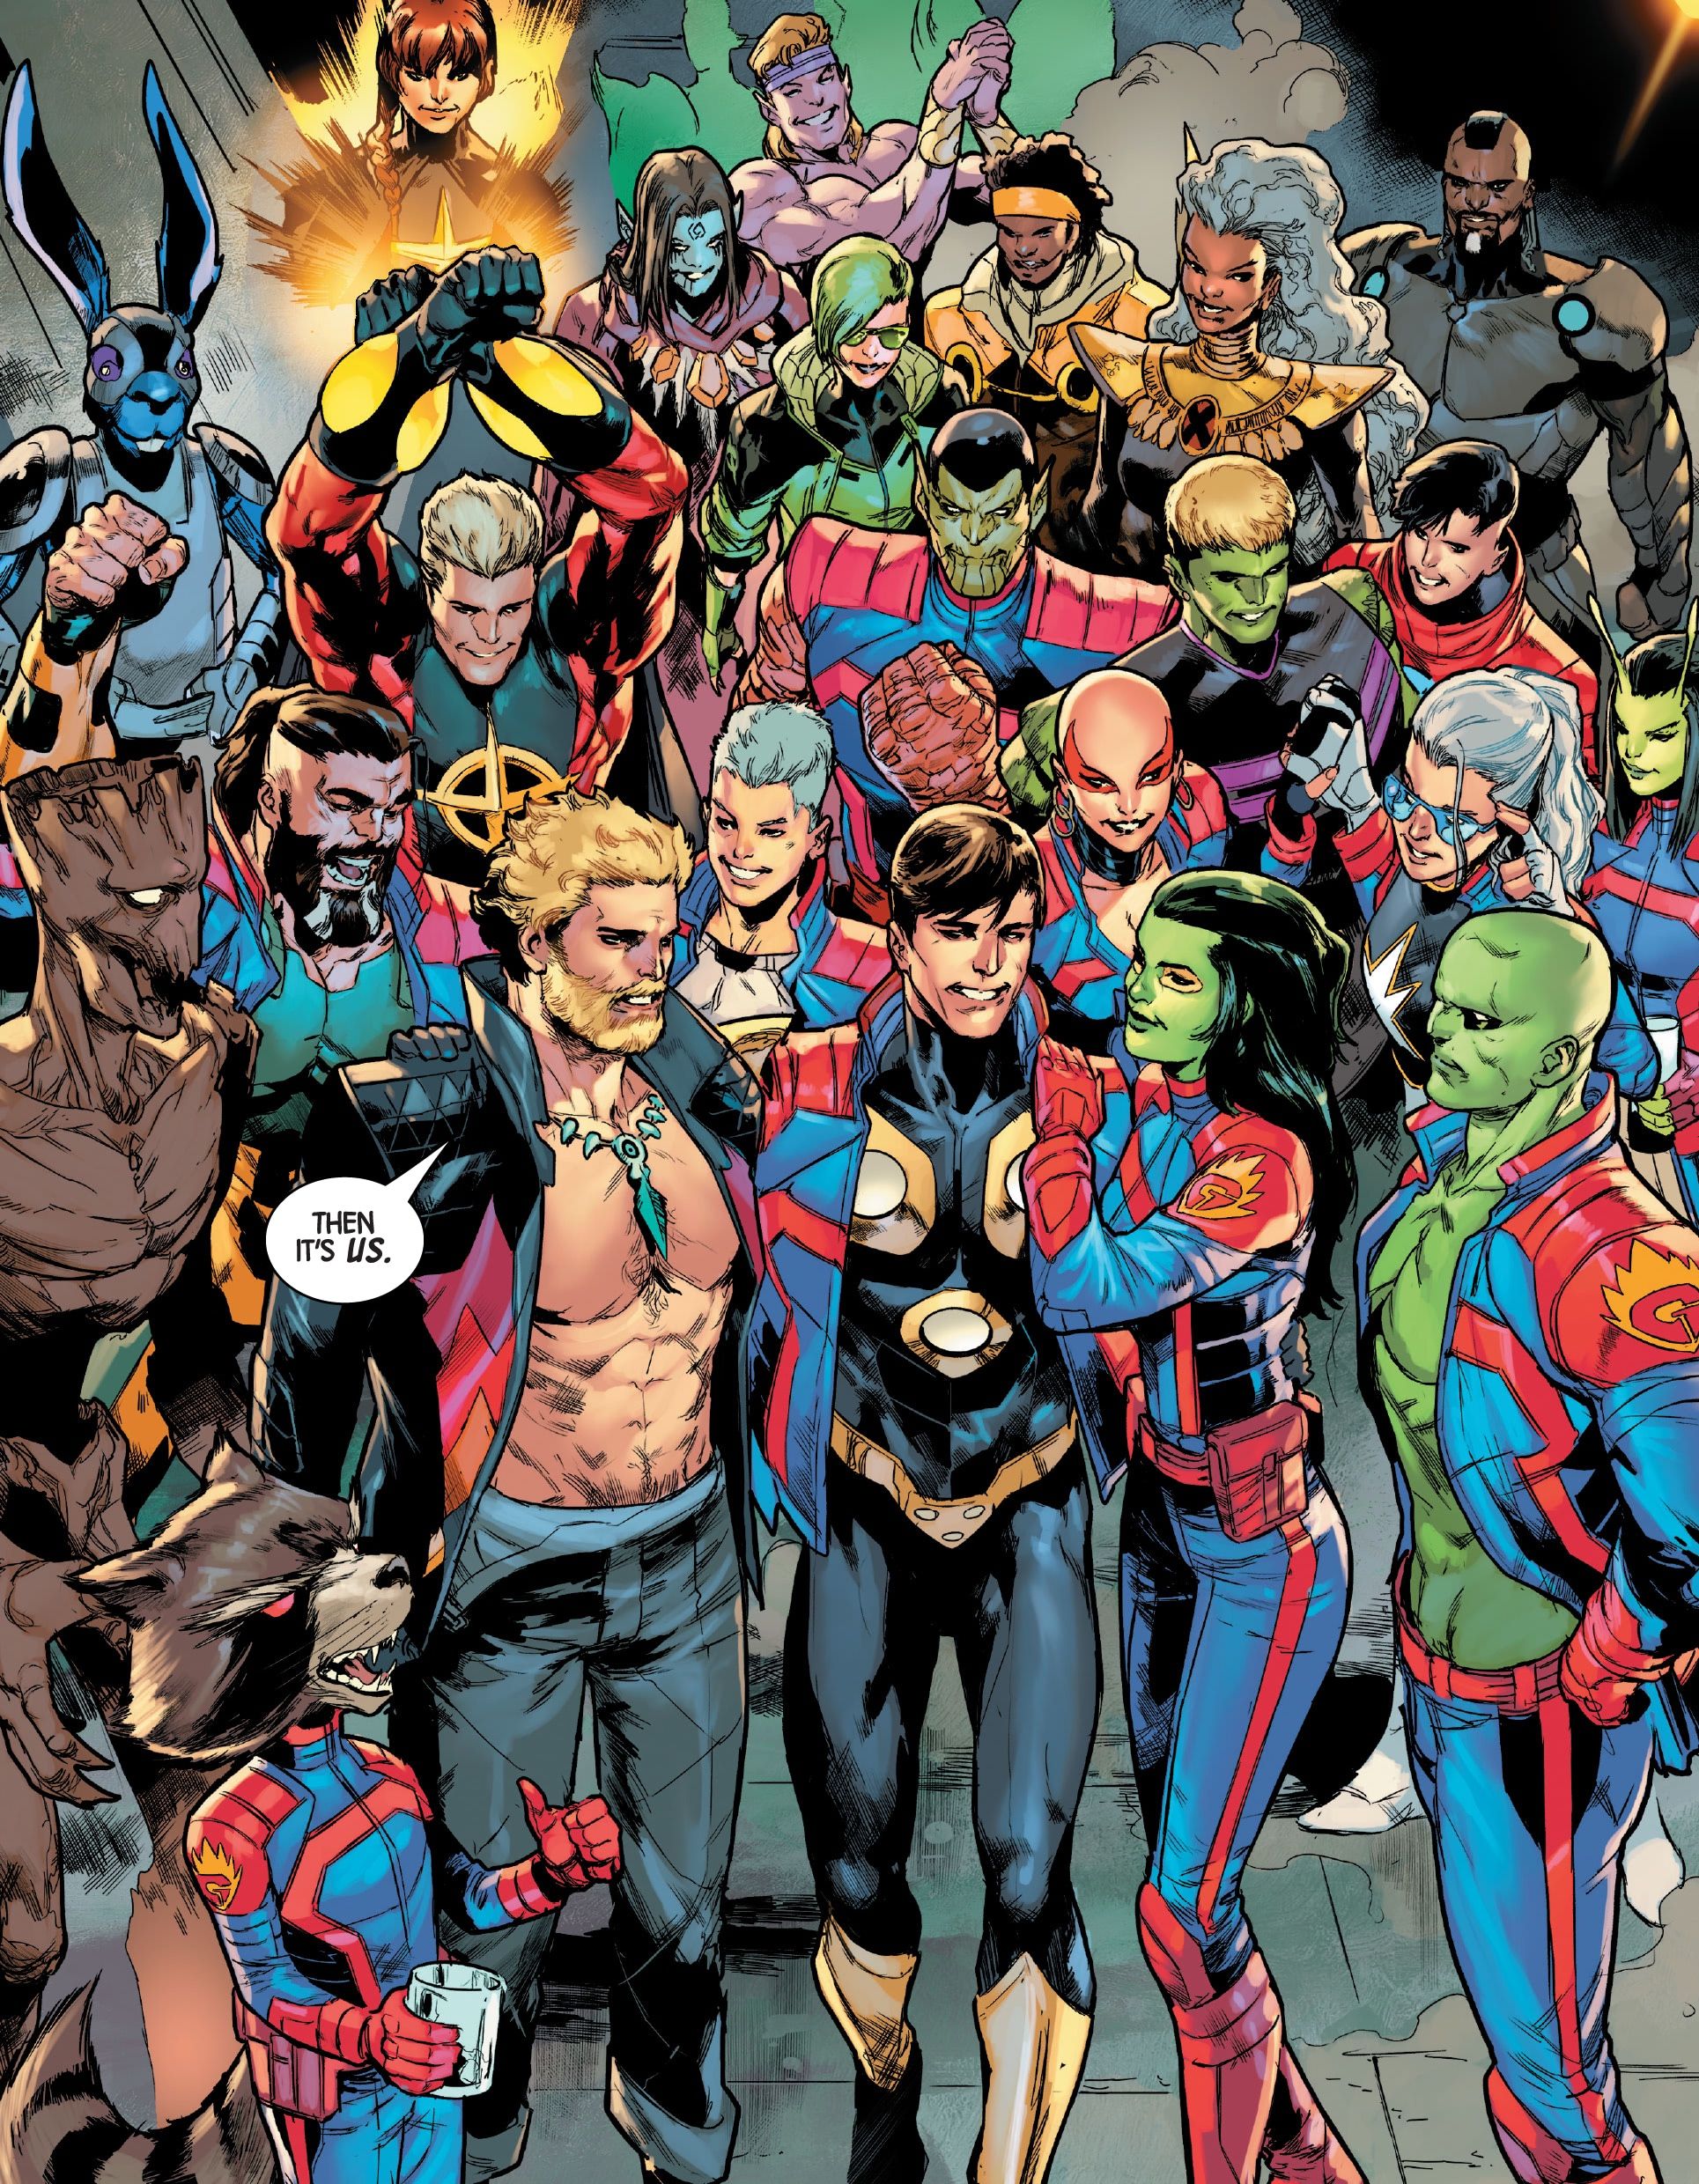 A gaggle of Guardians of the Galaxy, including Star-Lord, Gamora, Drax and others